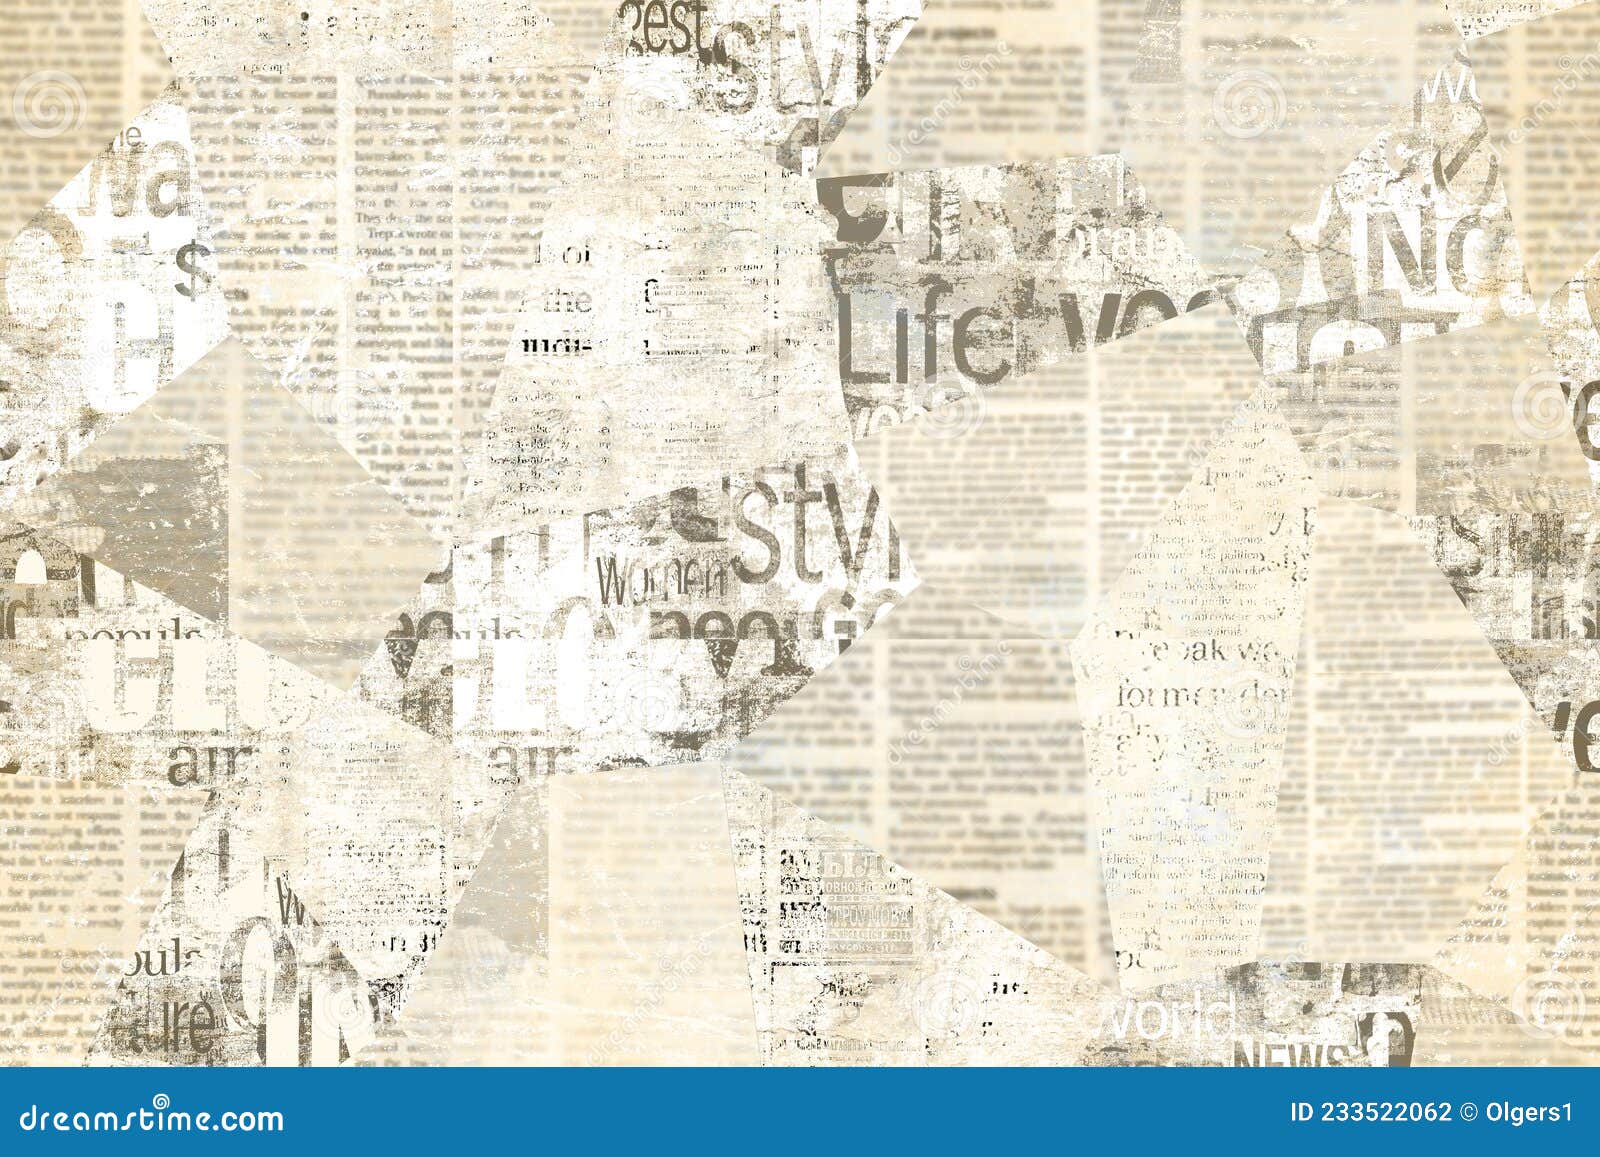 Old paper texture background. Newspaper page vintage style and